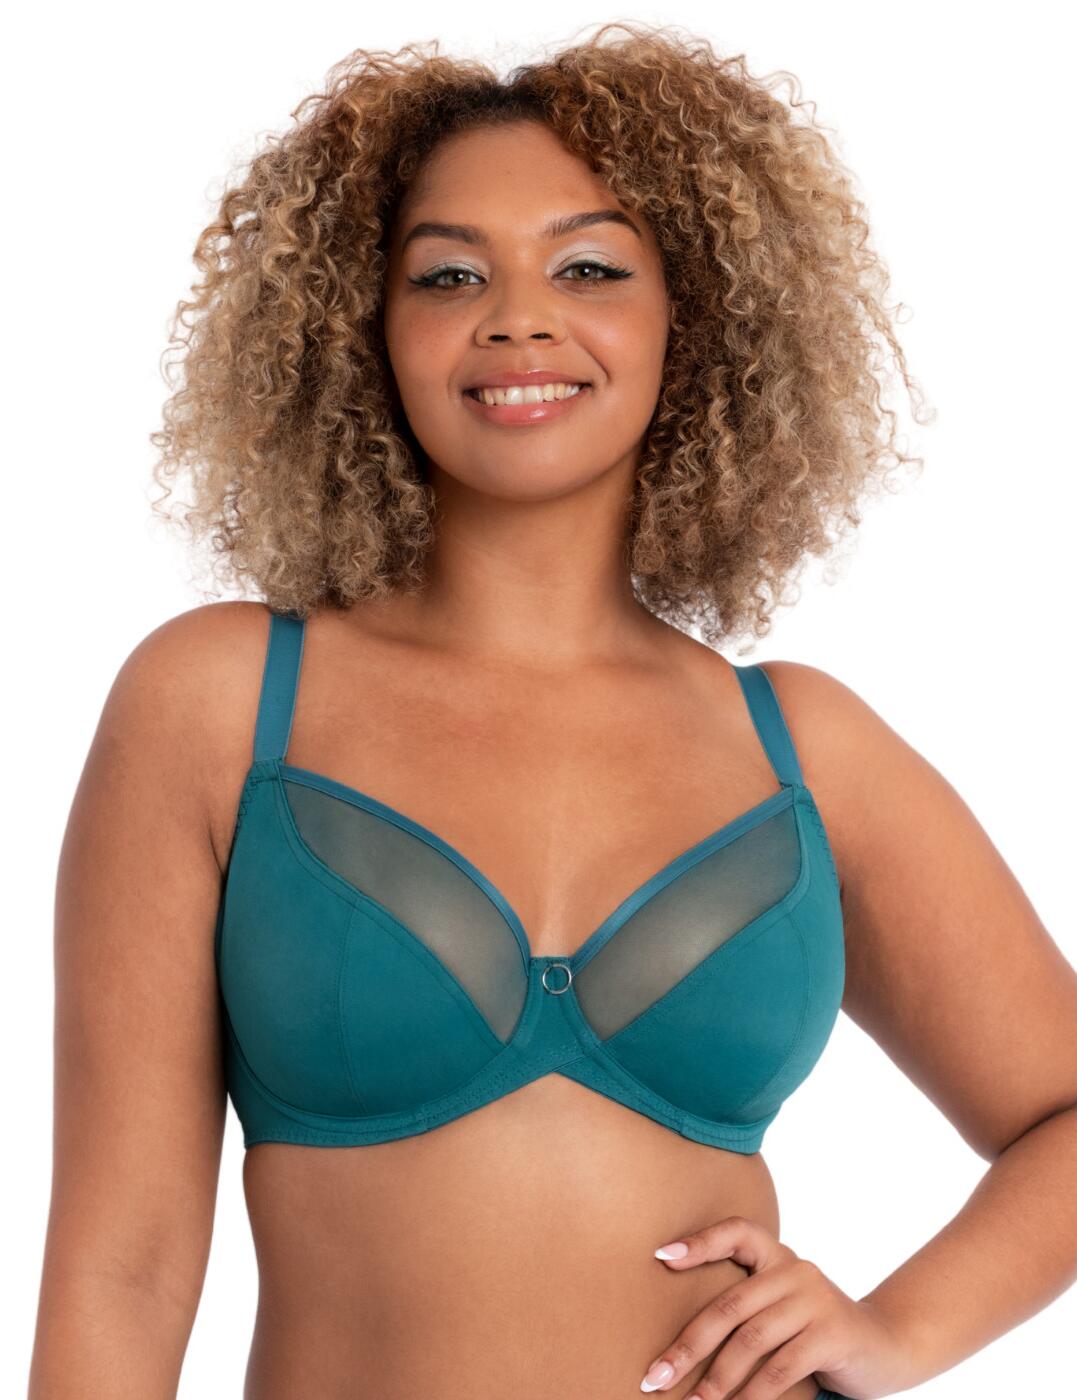 How UK and US bra sizes compare – Curvy Kate US